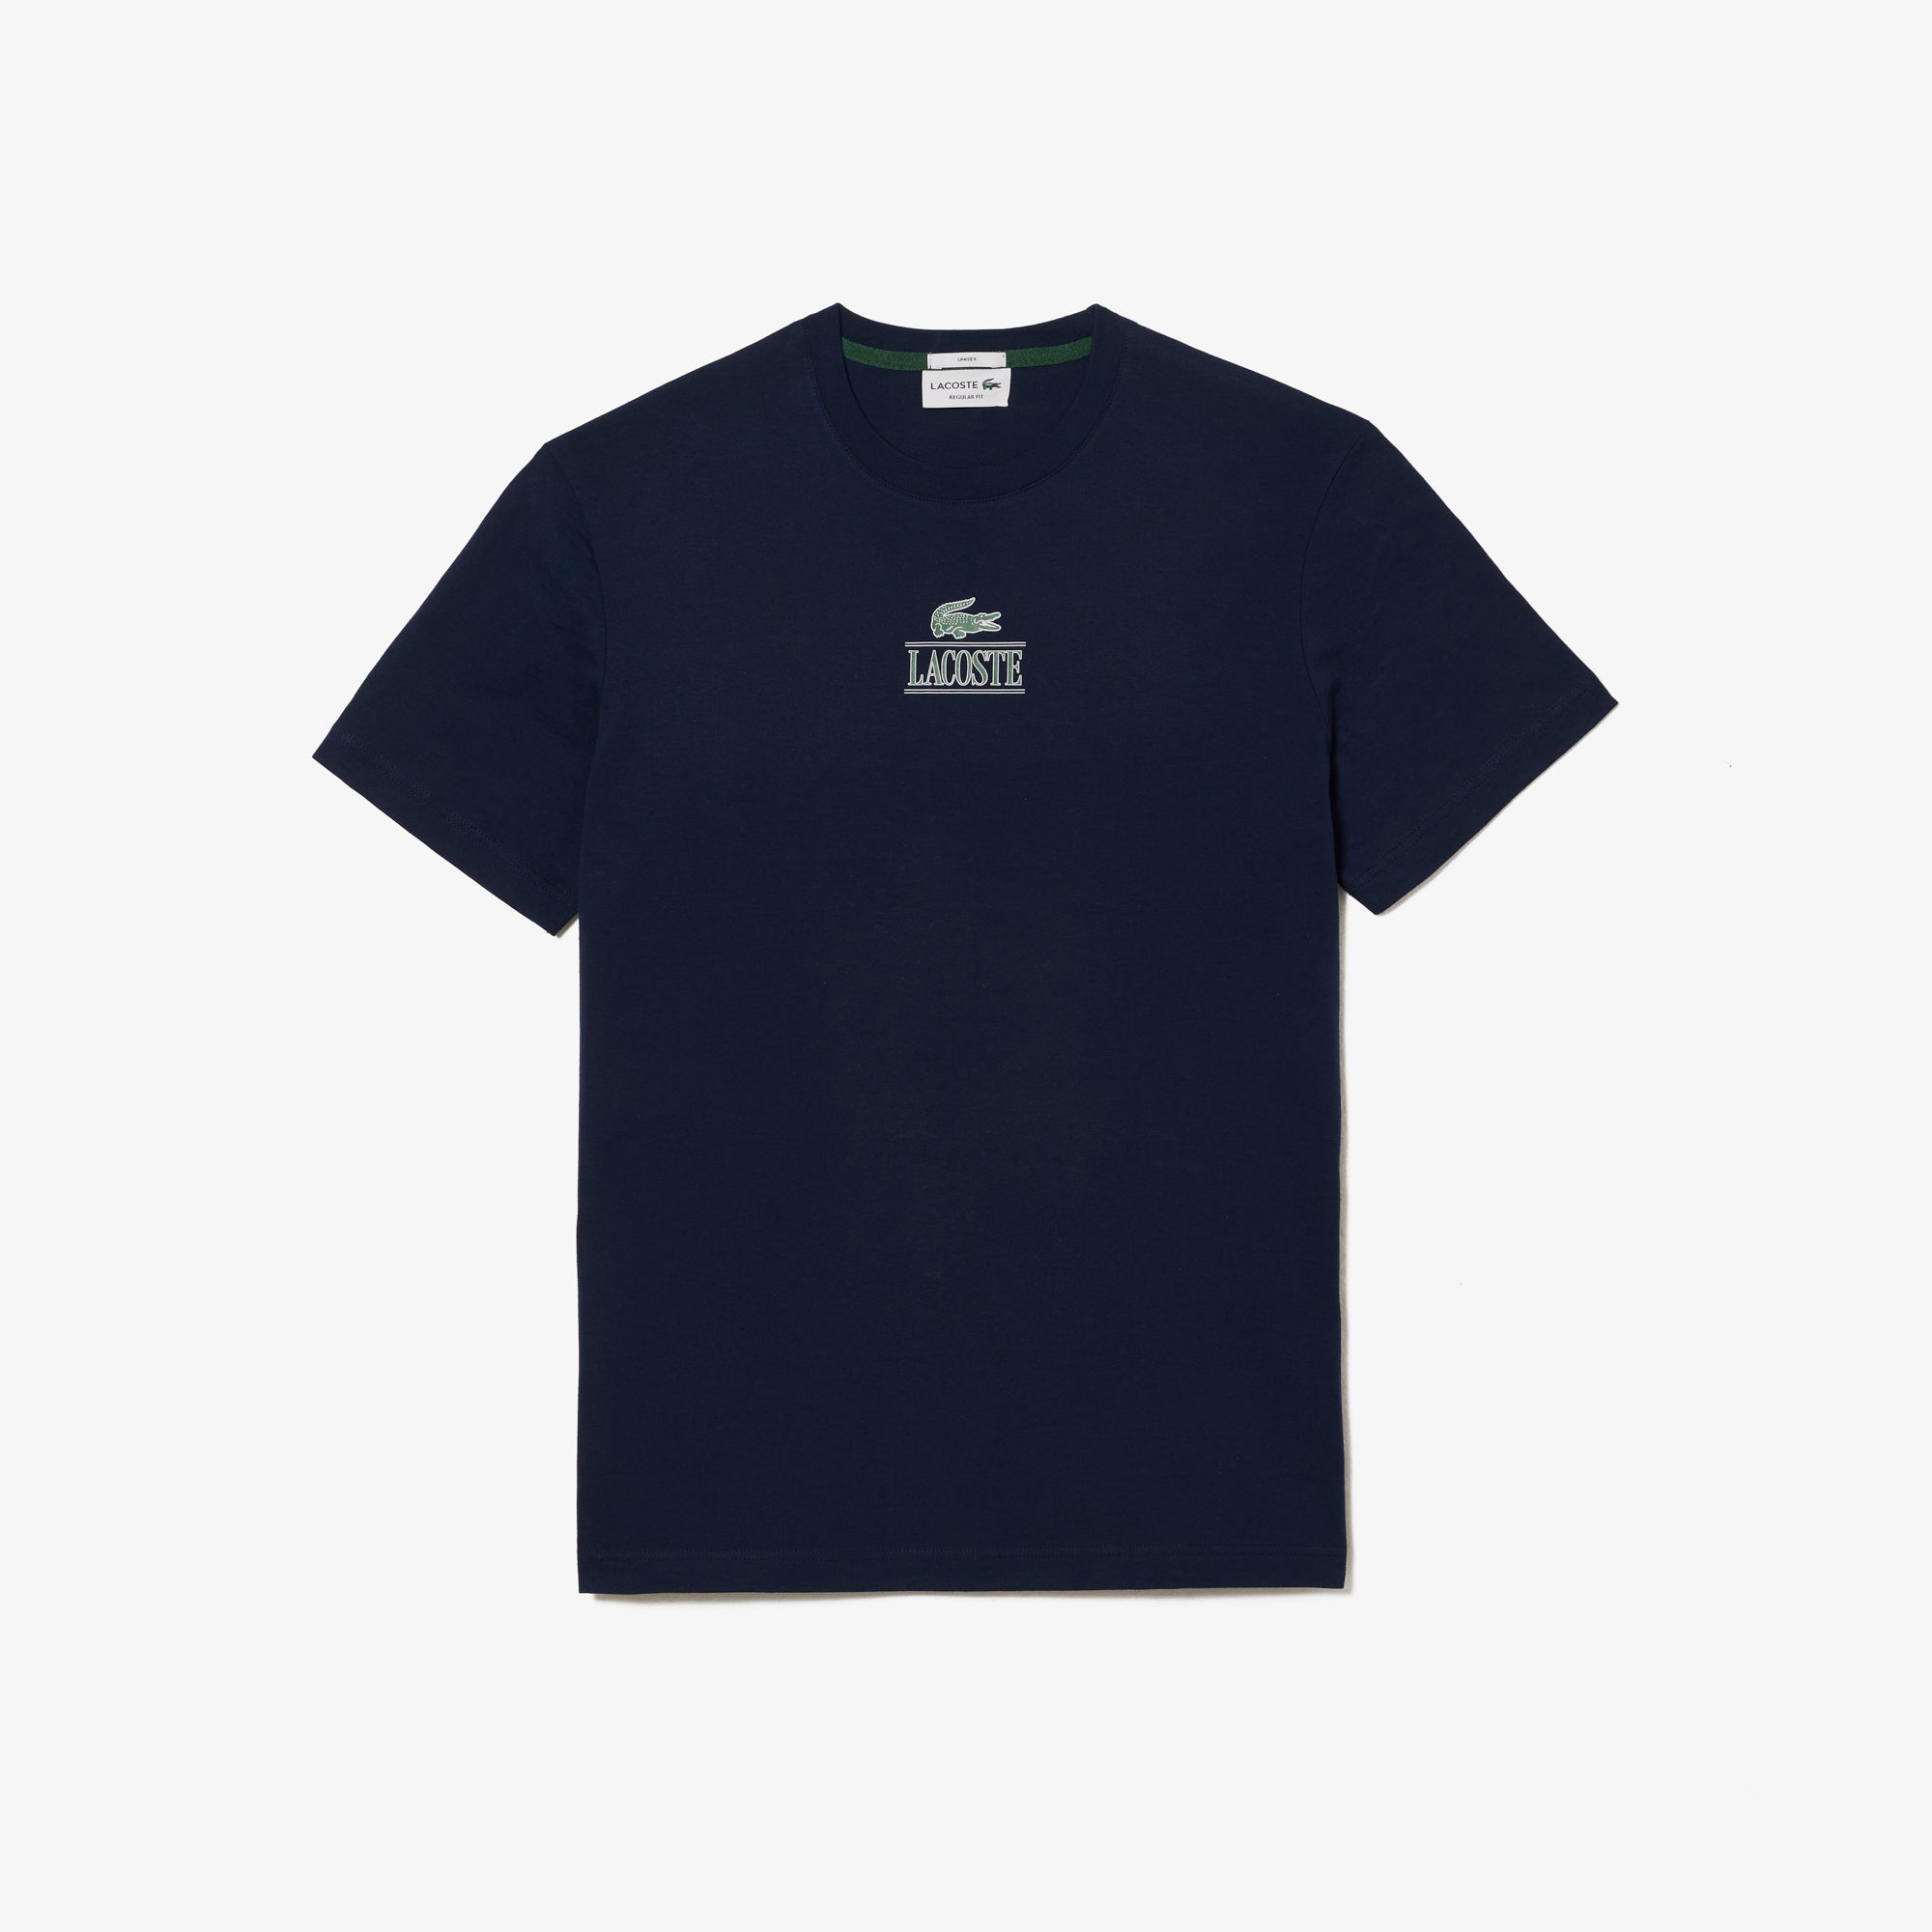 Lacoste Unisex Regular Fit Cotton Jersey Branded T-Shirt Navy Blue TH1147 166